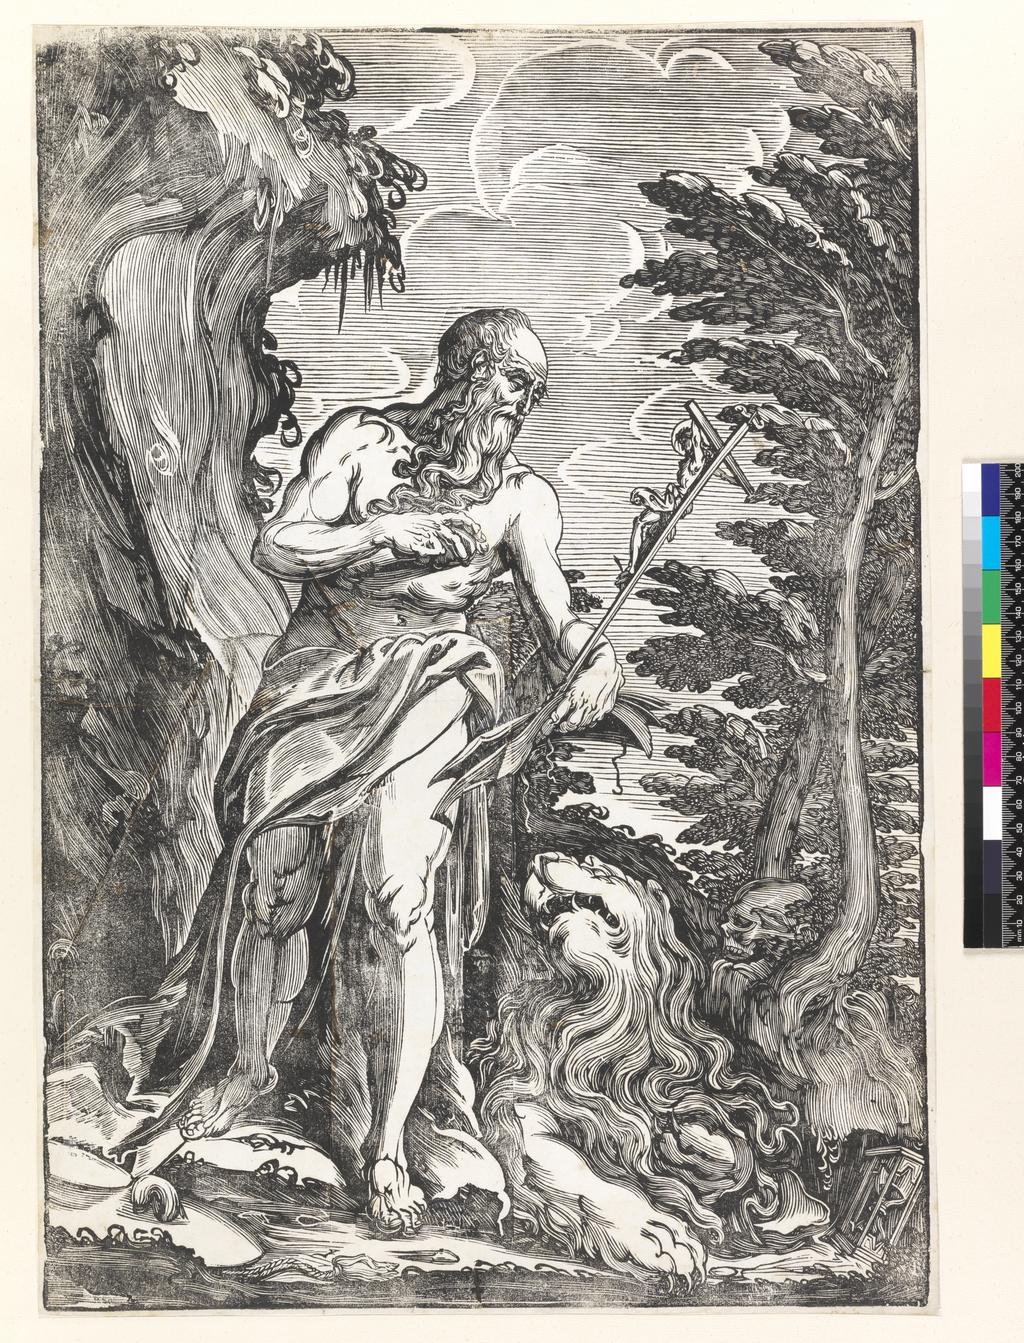 An image of St Jerome in penitence. Scolari, Giuseppe (Italian, active 1592-1607). Woodcut, circa 1590-circa 1600. Production Note: Not etching, as stated in Passavant.